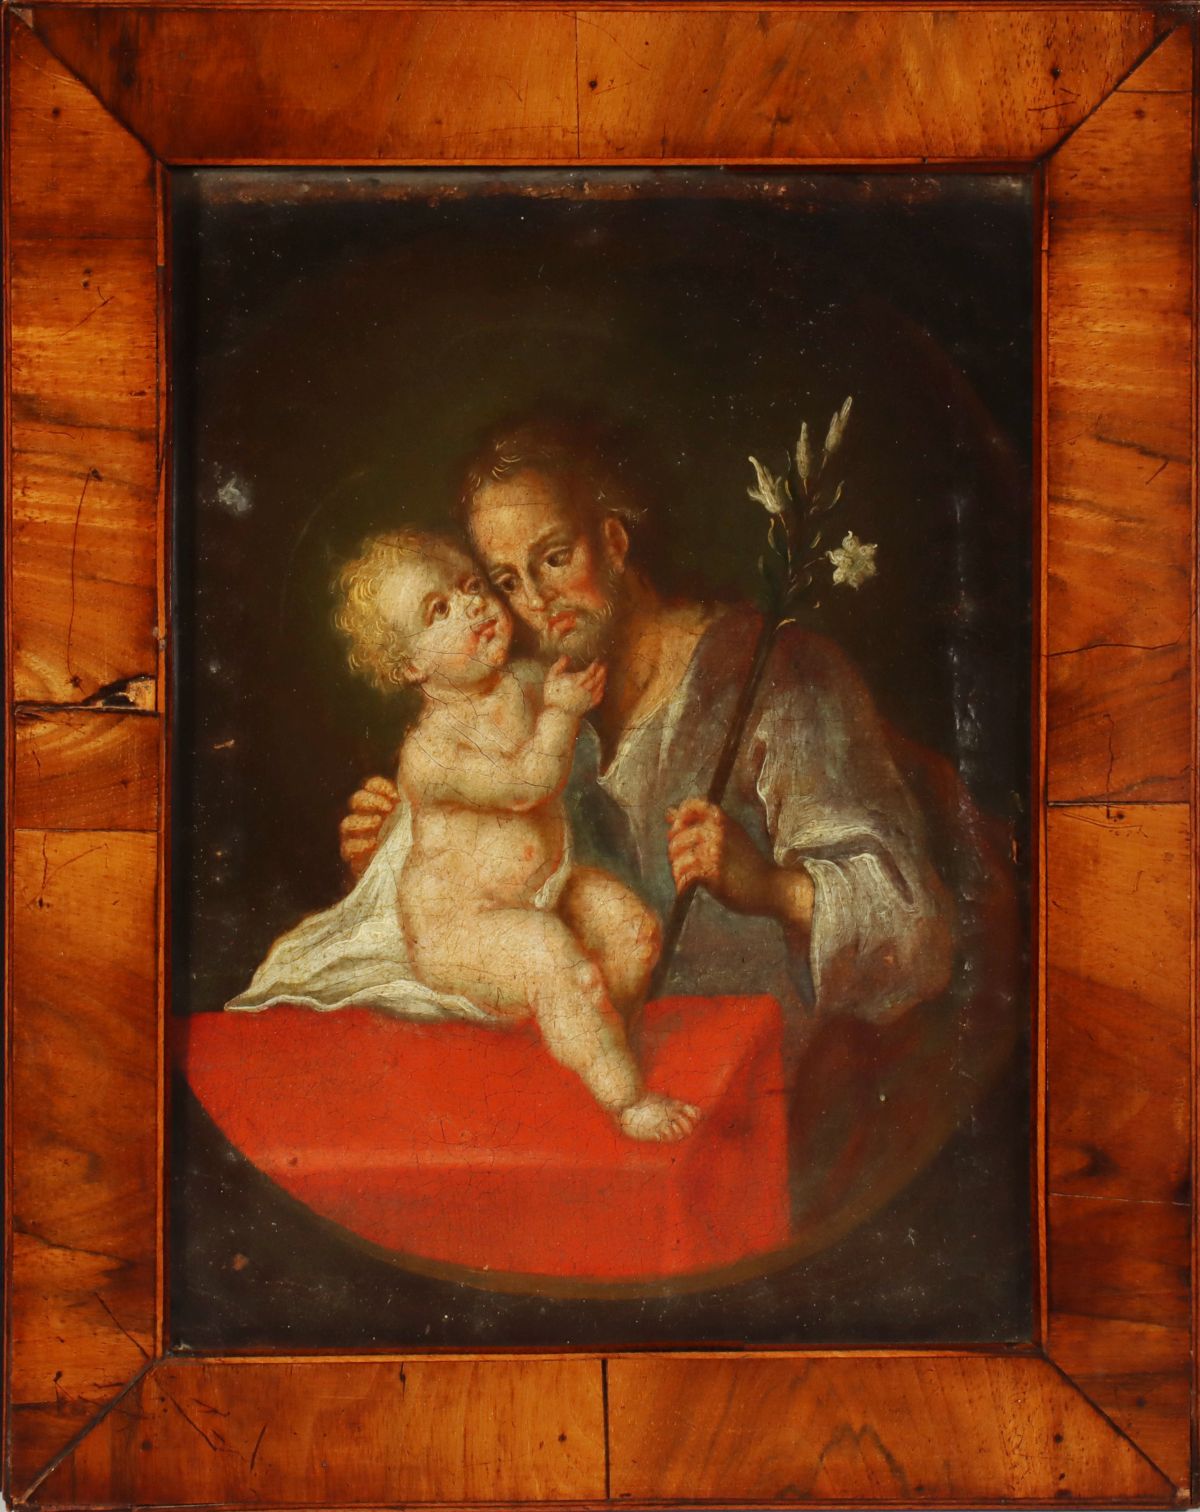 A 17TH CENTURY OIL OF ST. JOSEPH AND THE INFANT JESUS